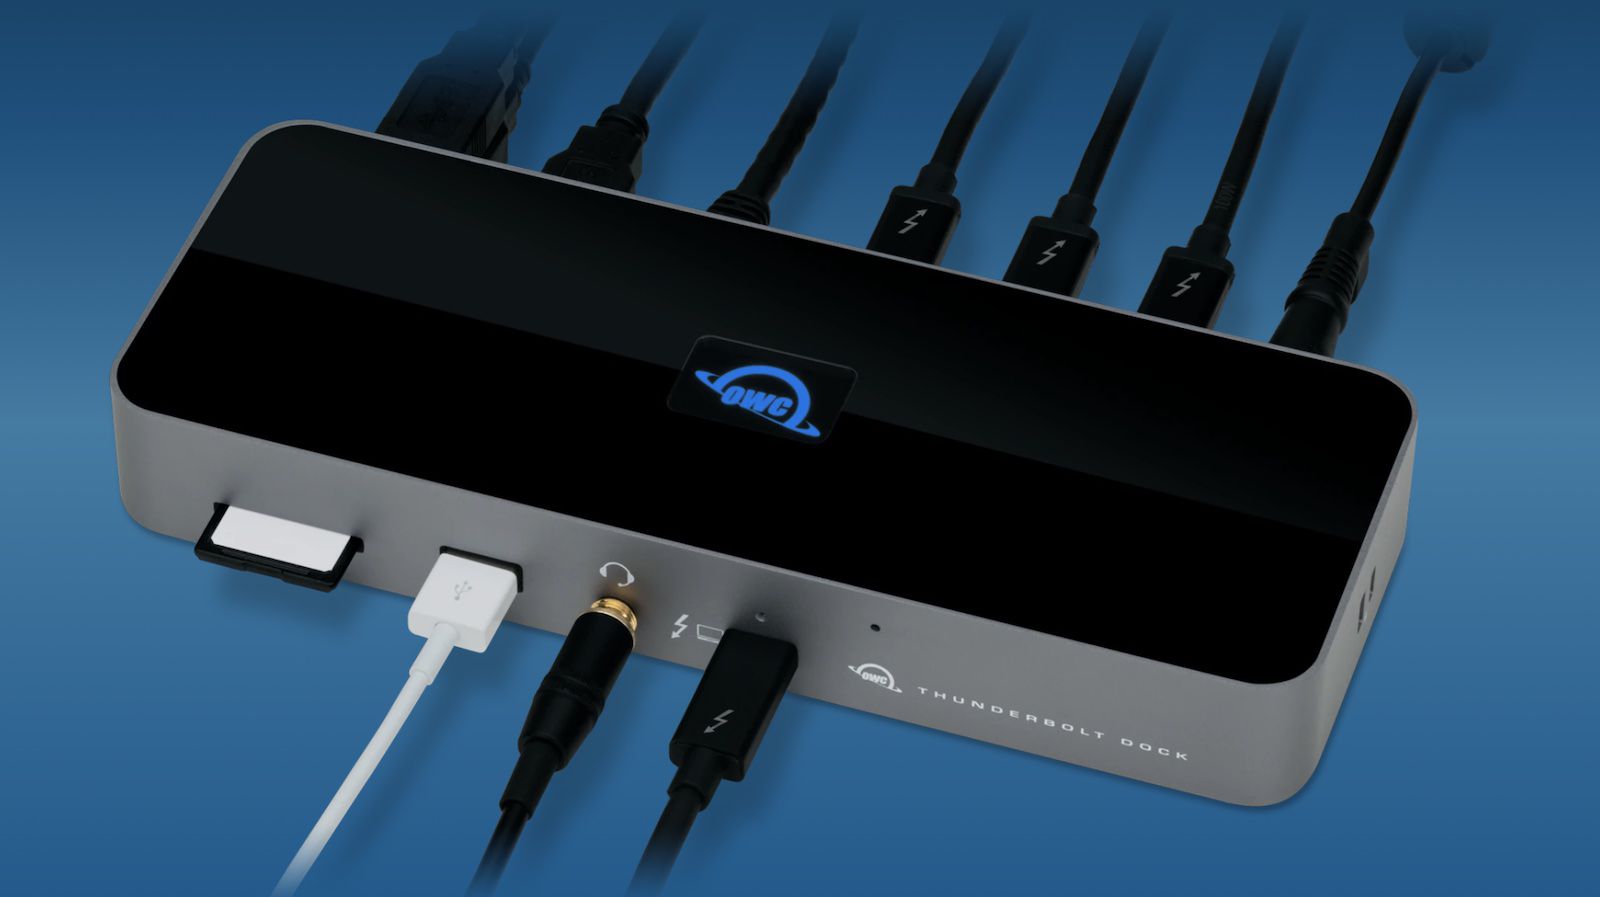 CES 2021: OWC Introduces Thunderbolt 4 Dock, New Storage Drives, and More - MacRumors